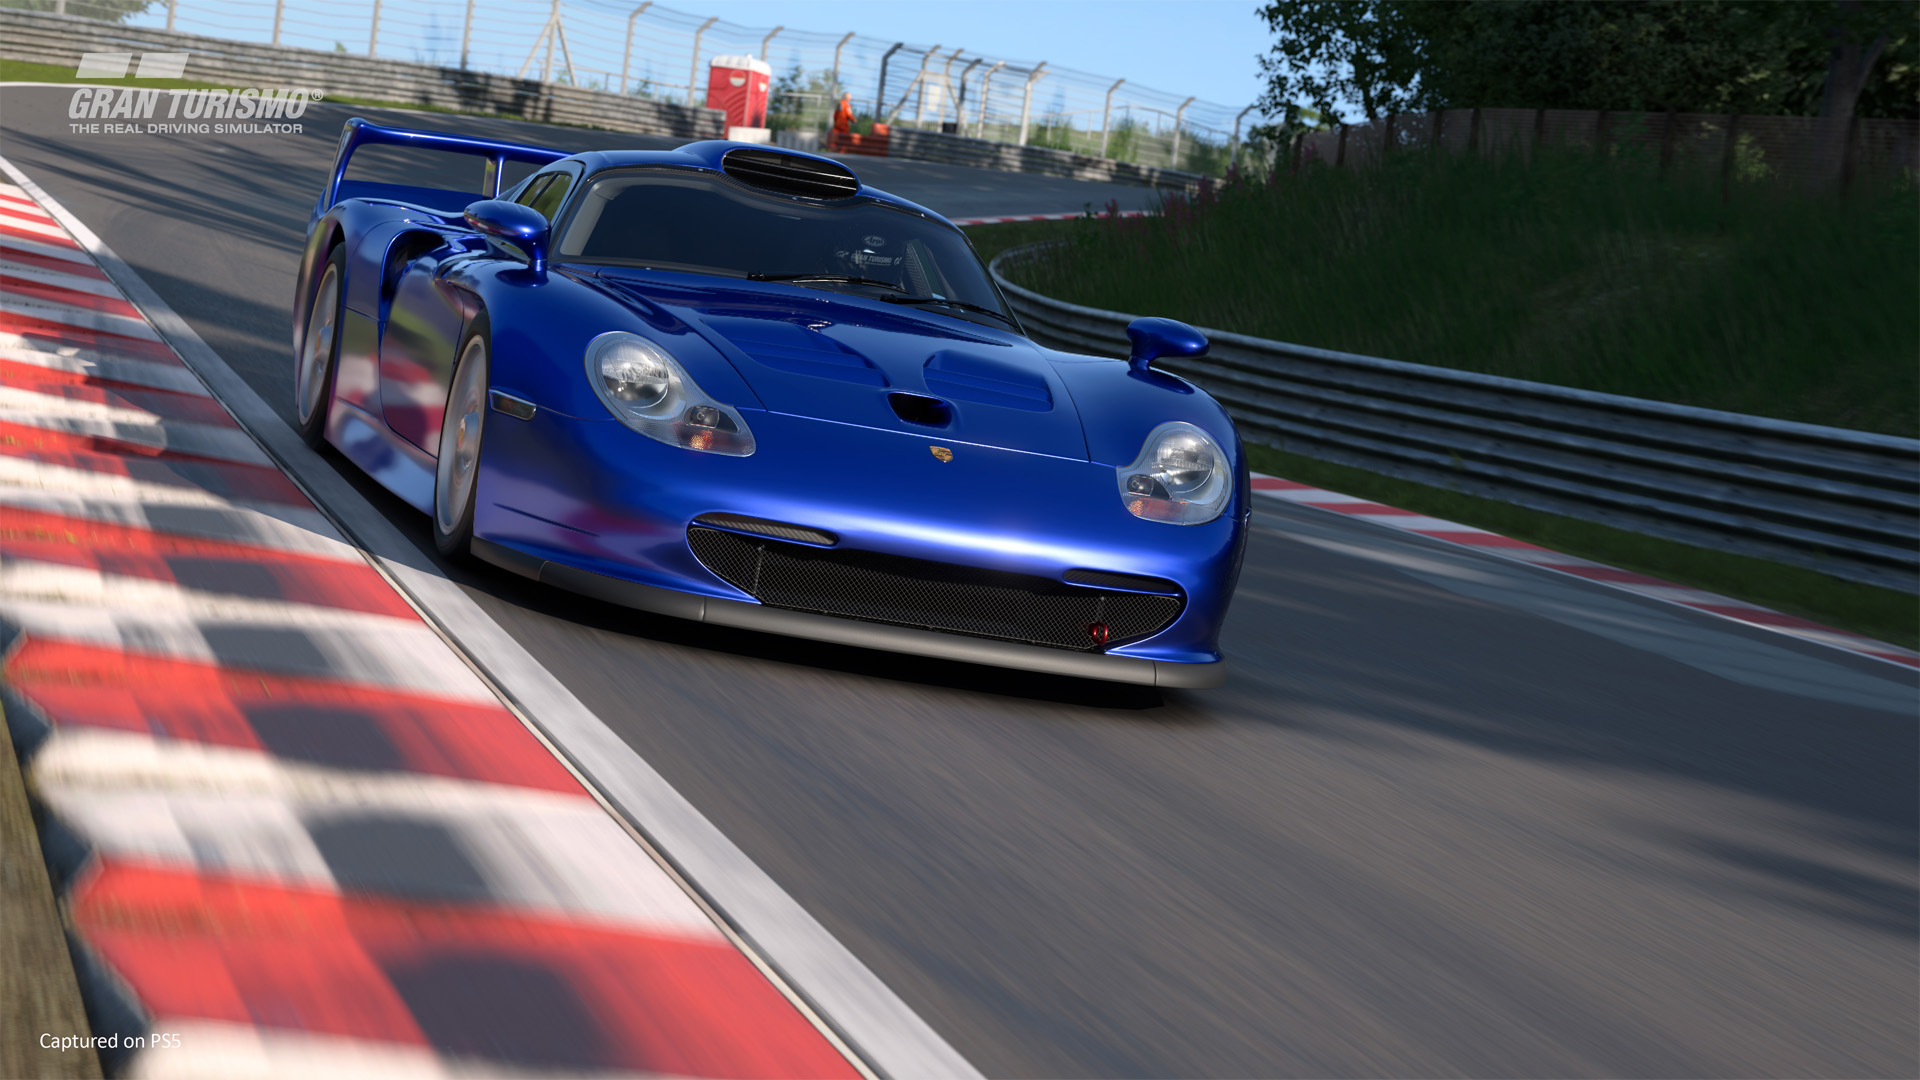 Gran Turismo 7 Currency Rewards to Be Increased Following Player